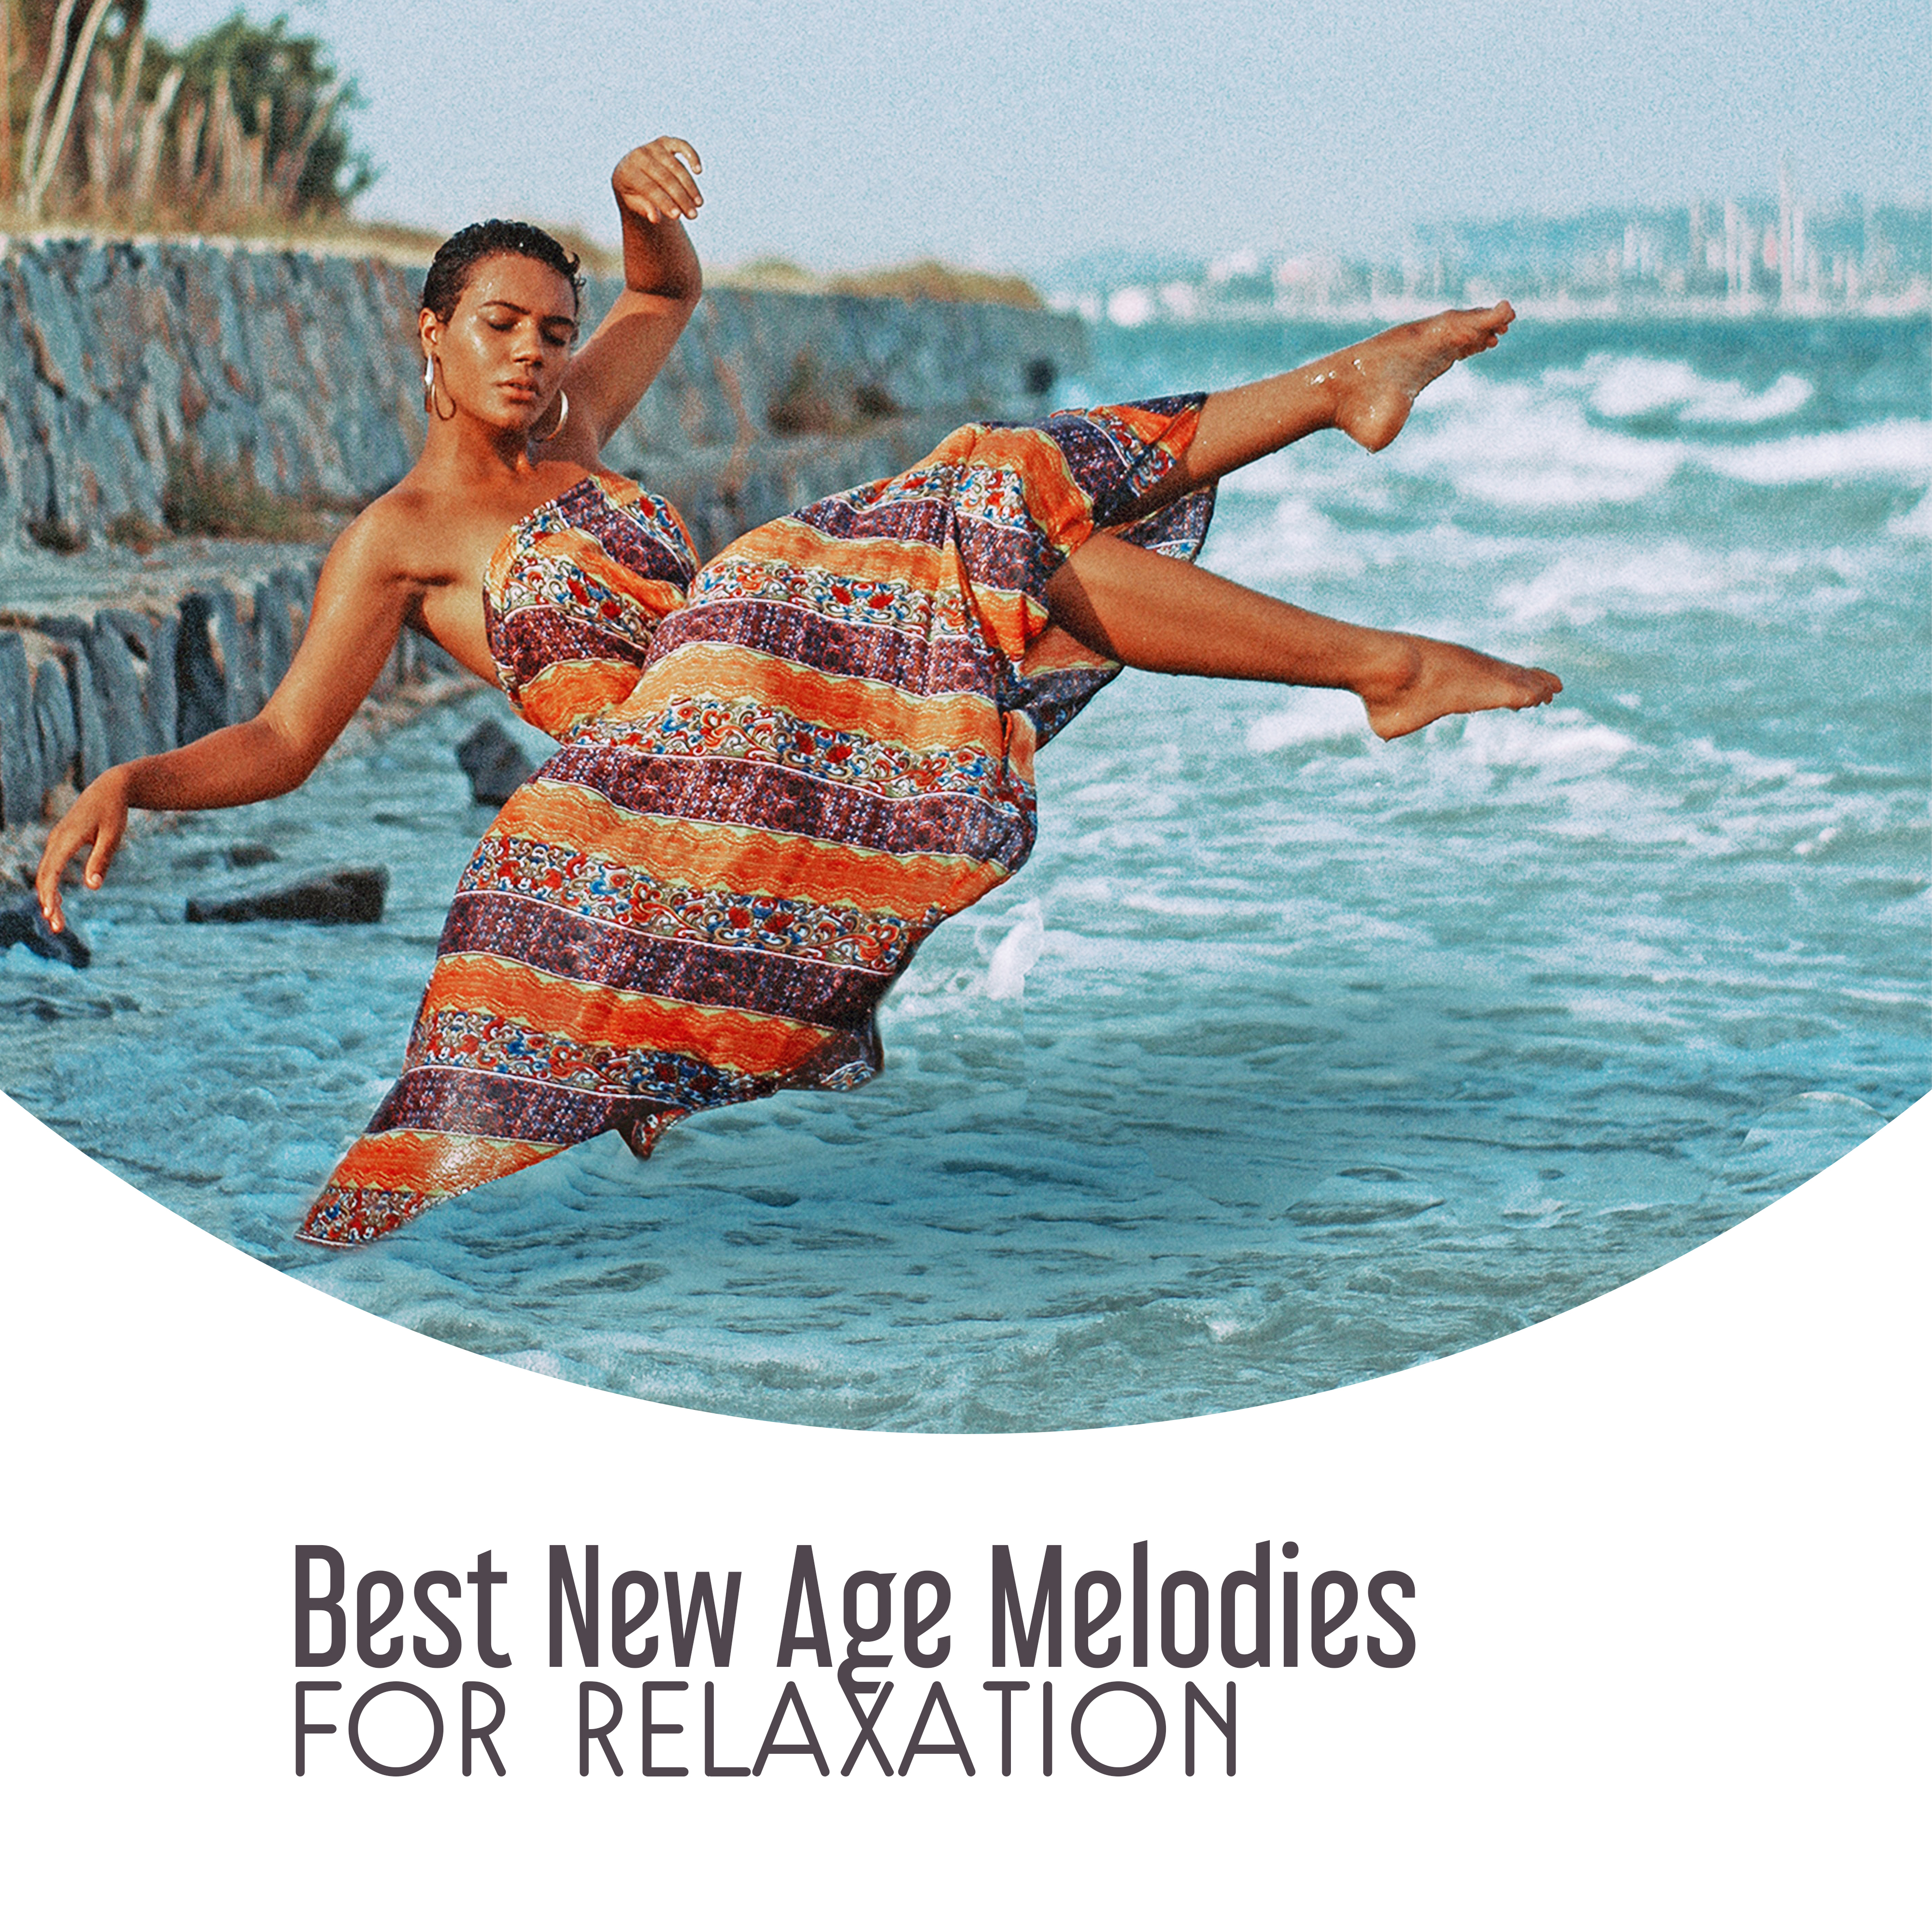 Best New Age Melodies for Relaxation